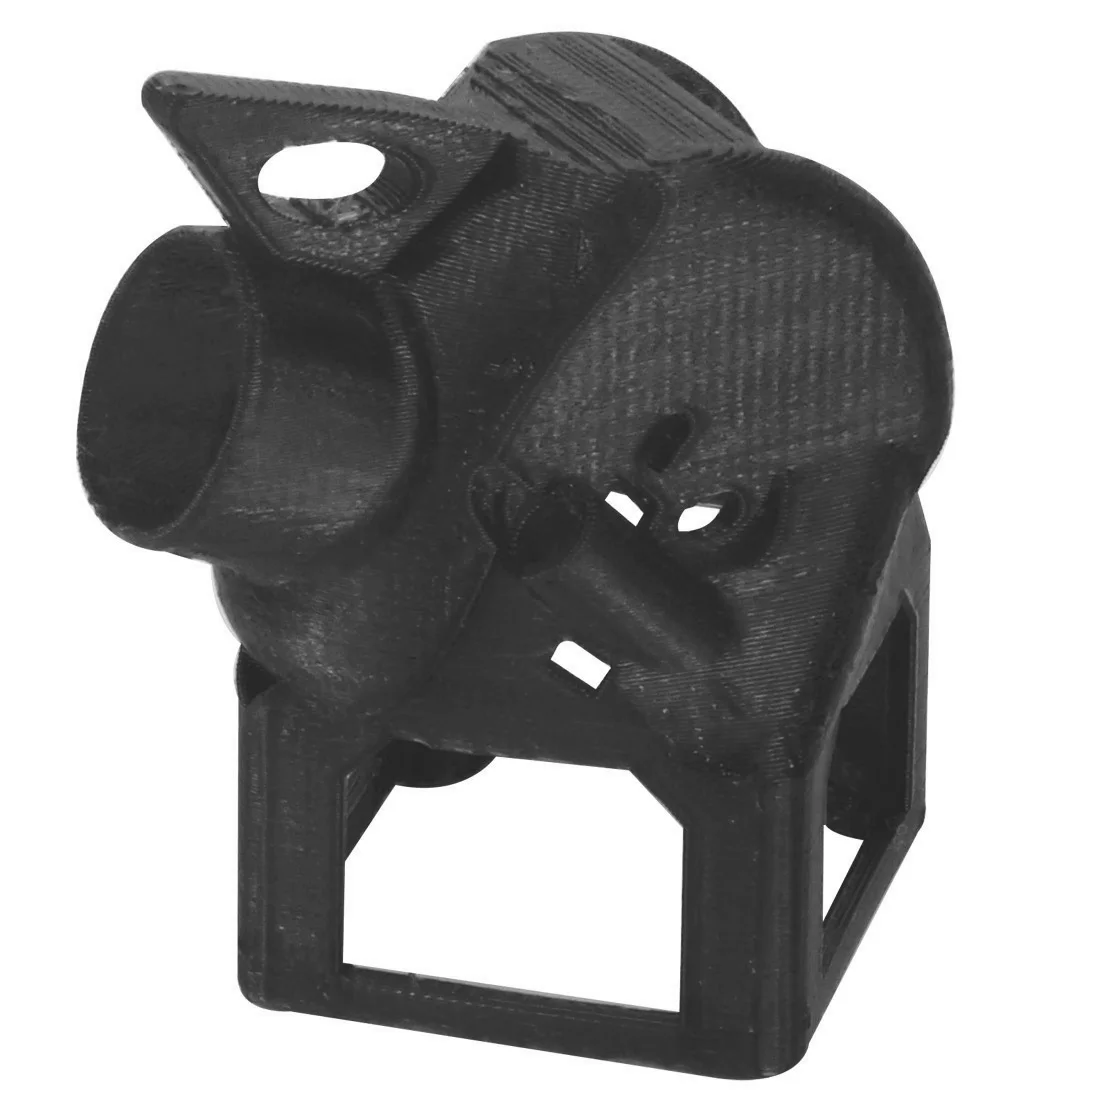 ShenStar TPU 3D Printed Printing 19mm Camera Cover Case Mount Adapter for Toothpick Rack RC Racing Drone Quadcopter Accessory